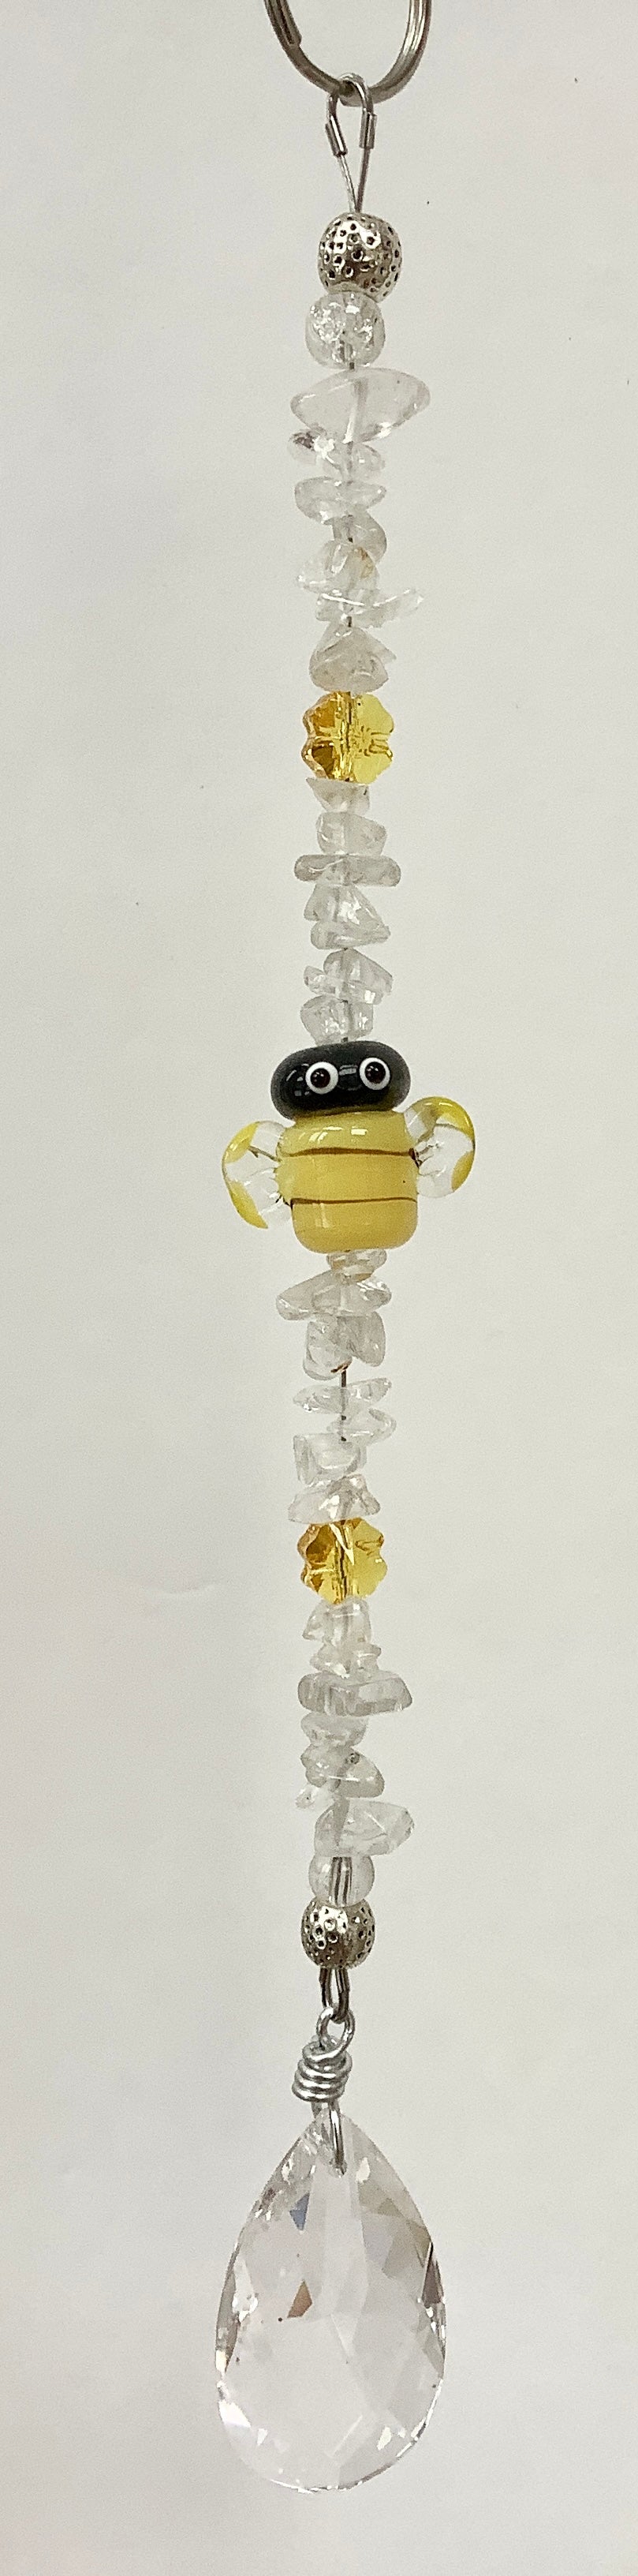 Bumble bee Suncatcher with Crystal Quartz and Swarovski clover flowers